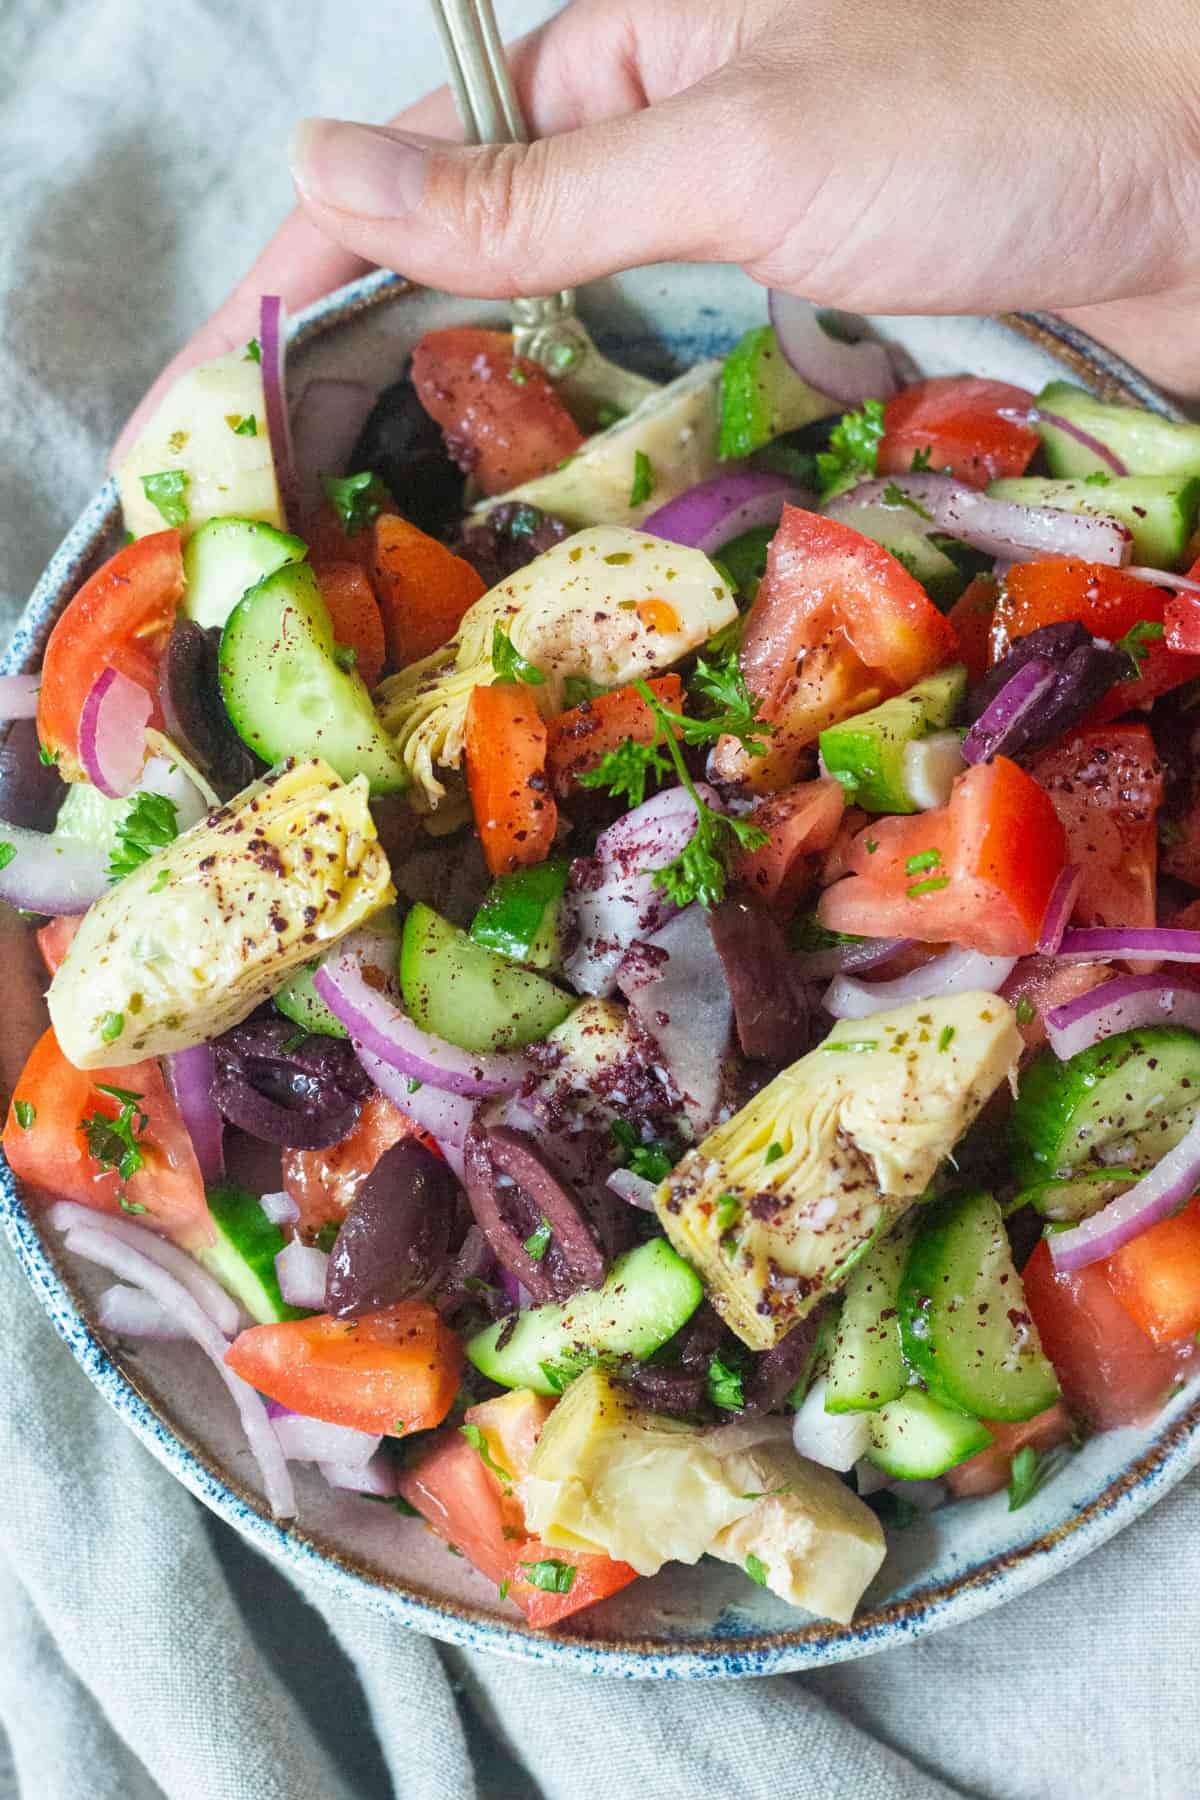 This Mediterranean salad is loaded with fresh vegetables such as cucumbers, tomatoes and herbs